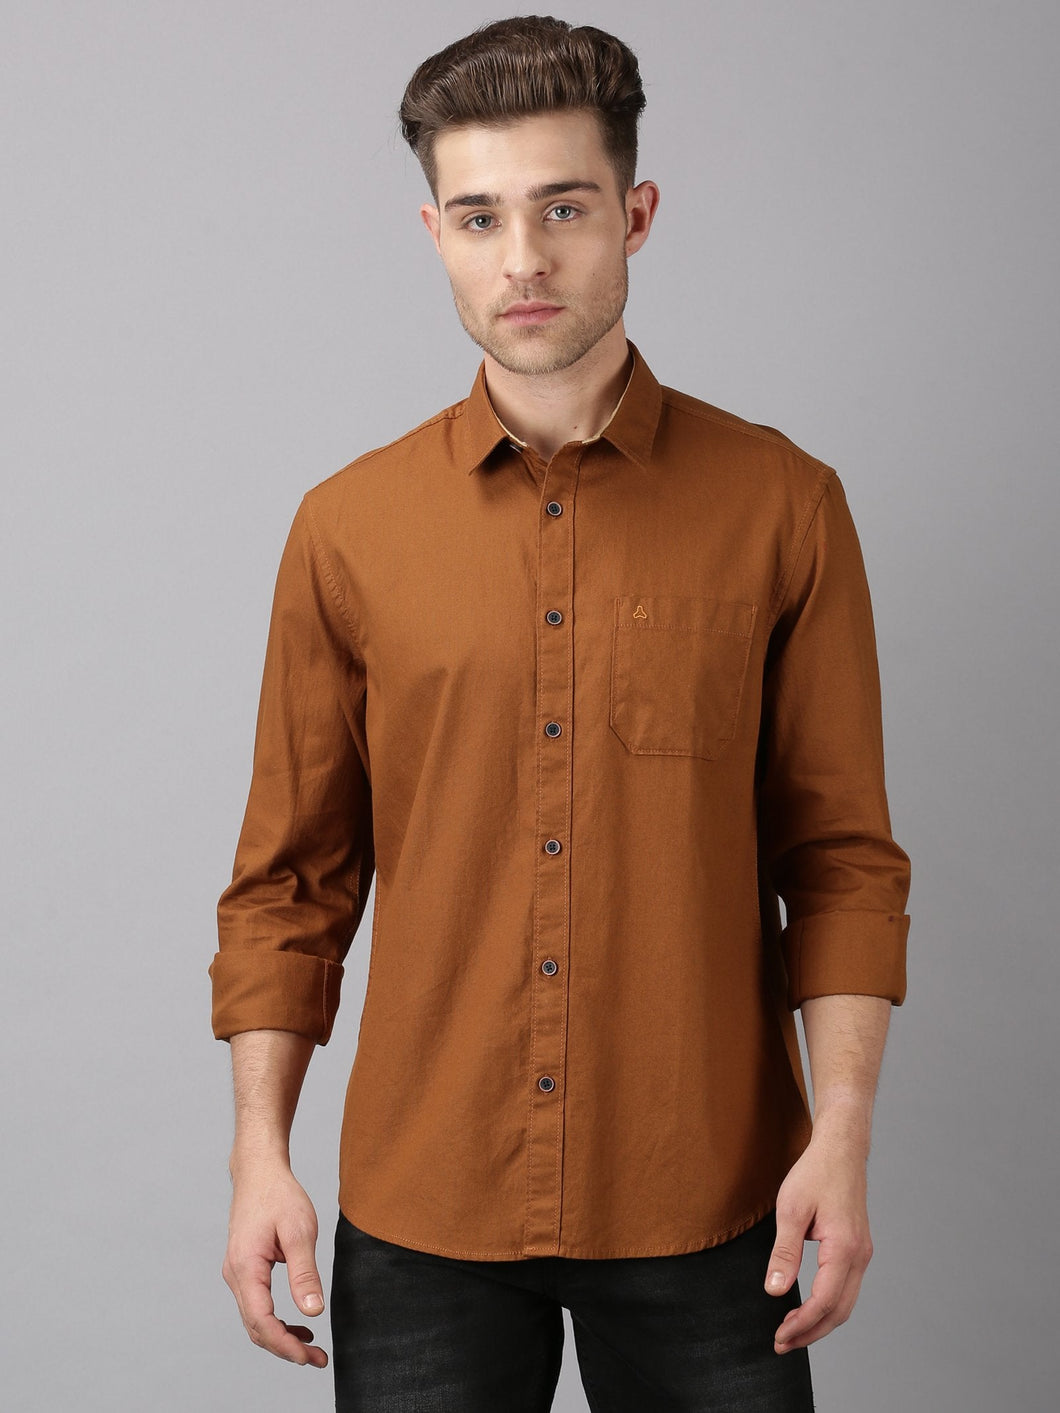 Polycotton Brown color Full Sleeve Formal shirt